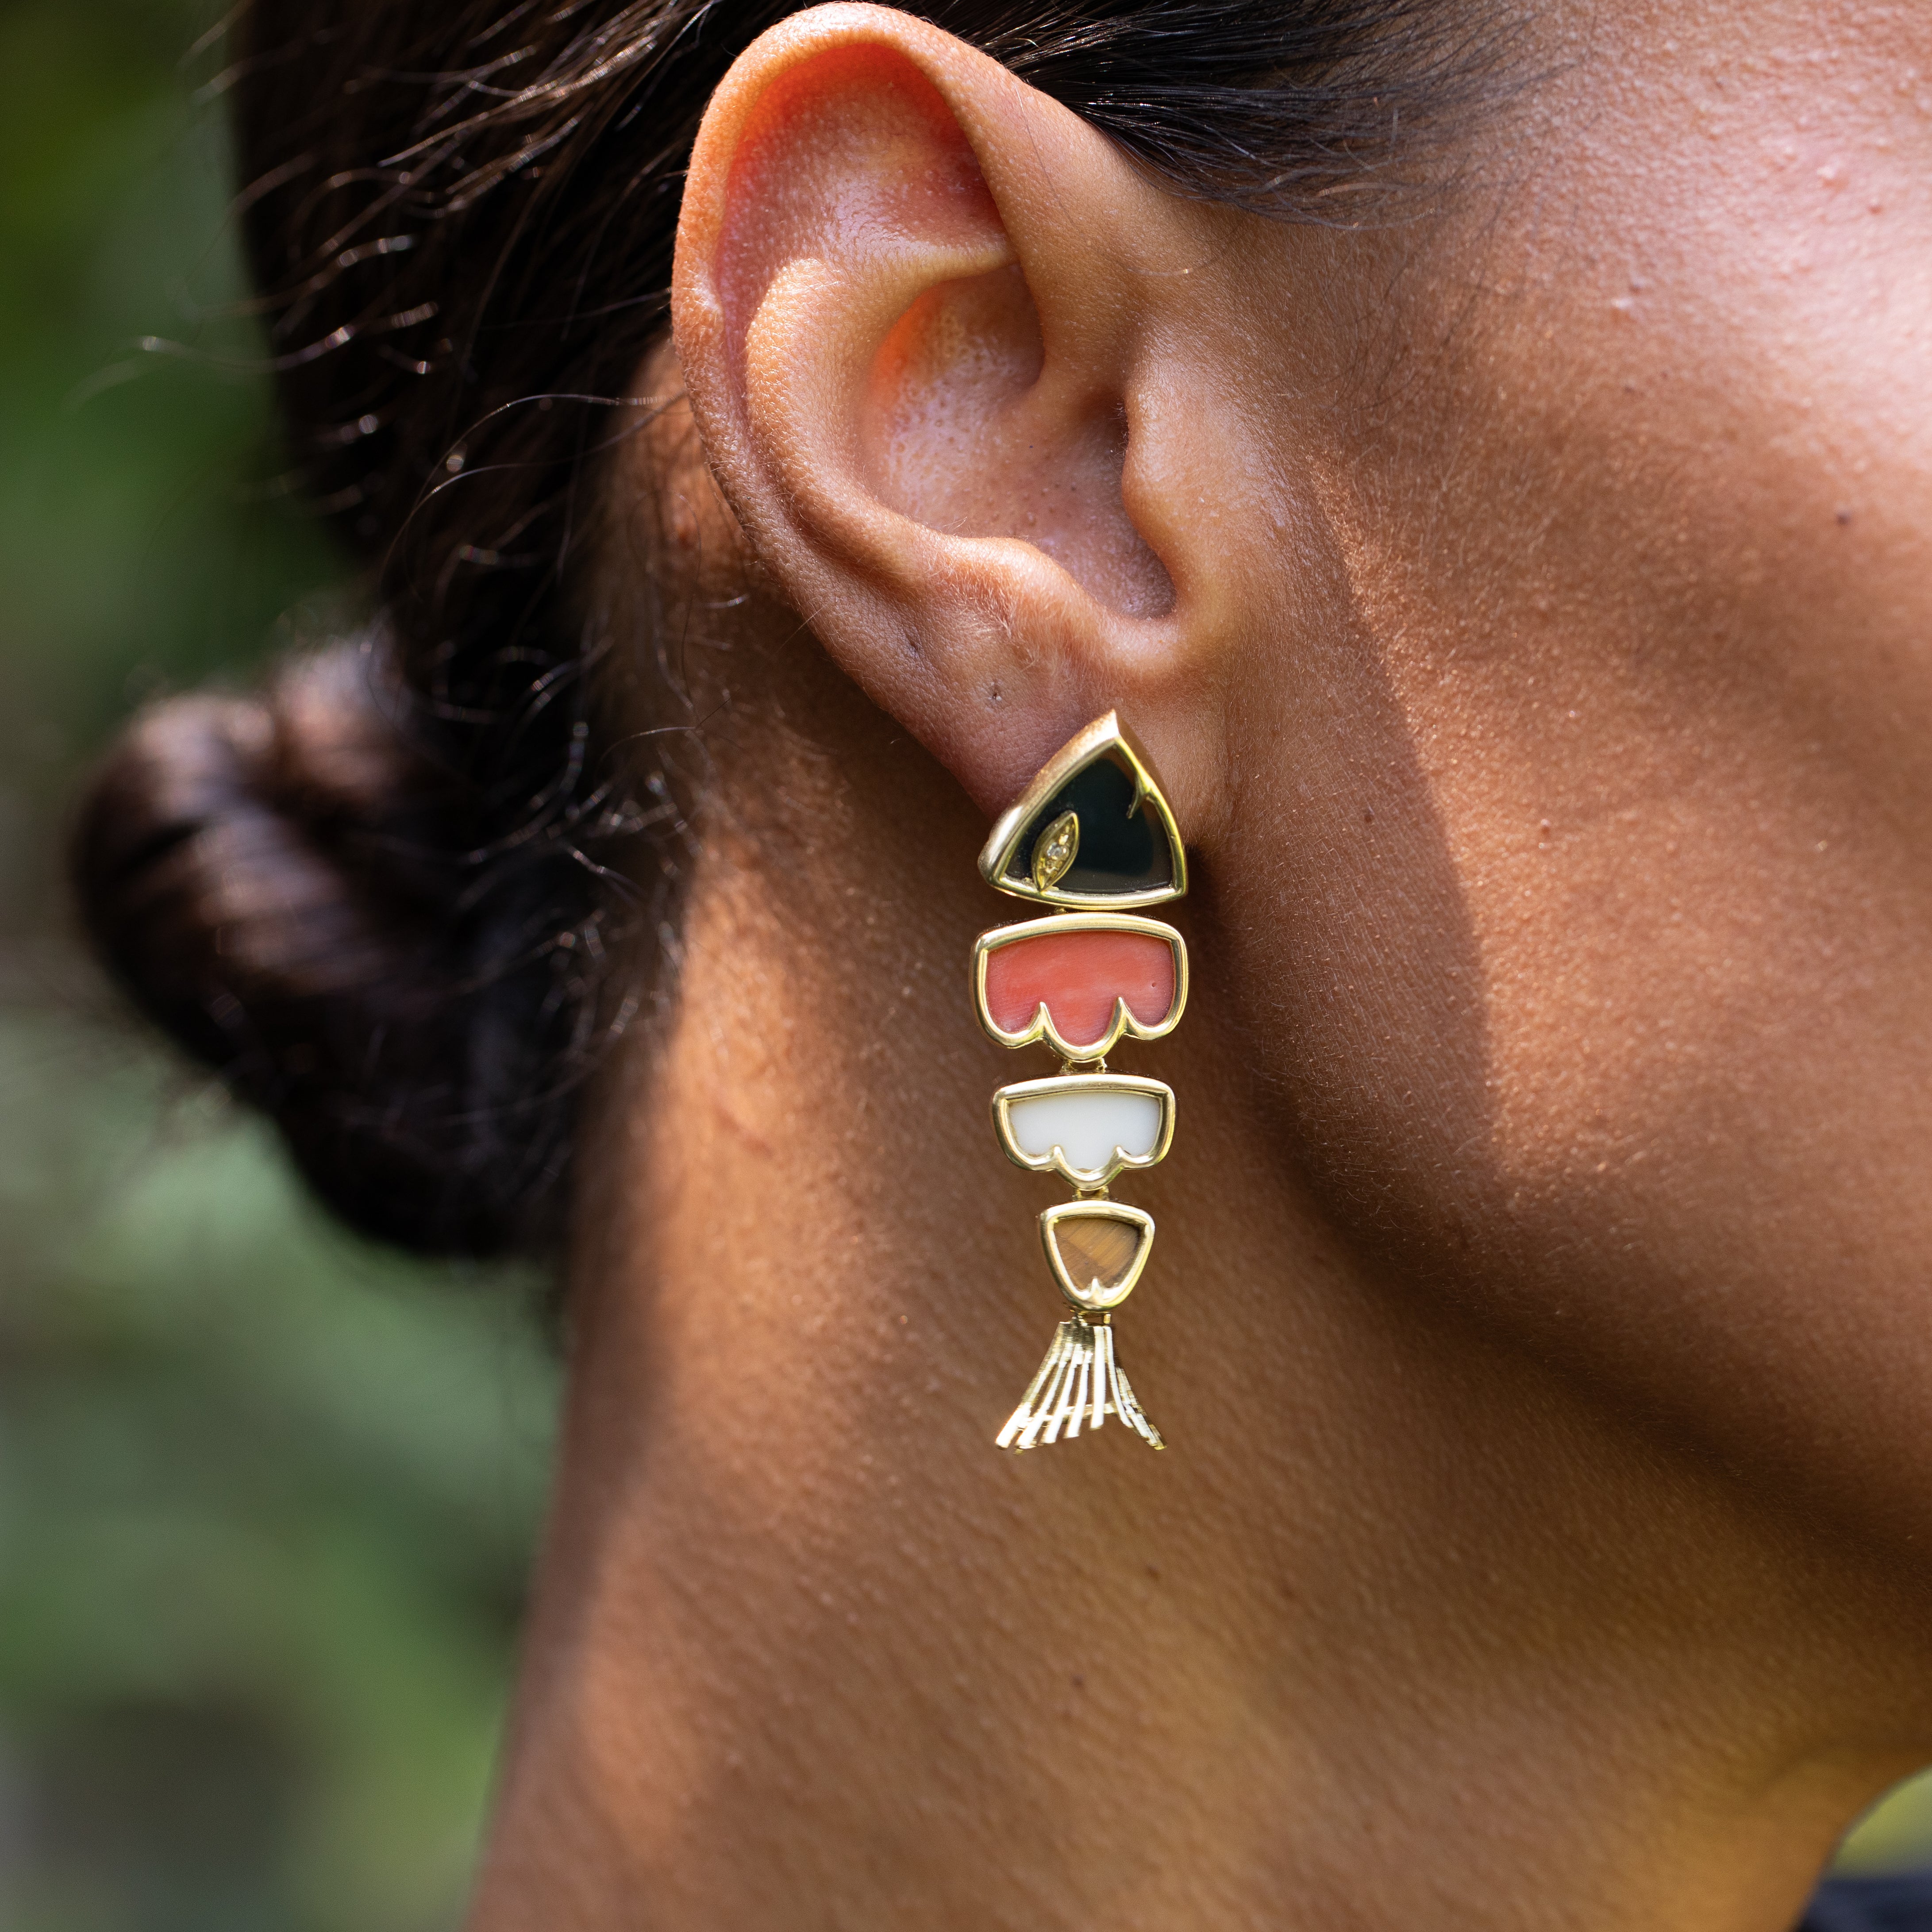 Multi-Stone and 18K Gold Fish Earrings